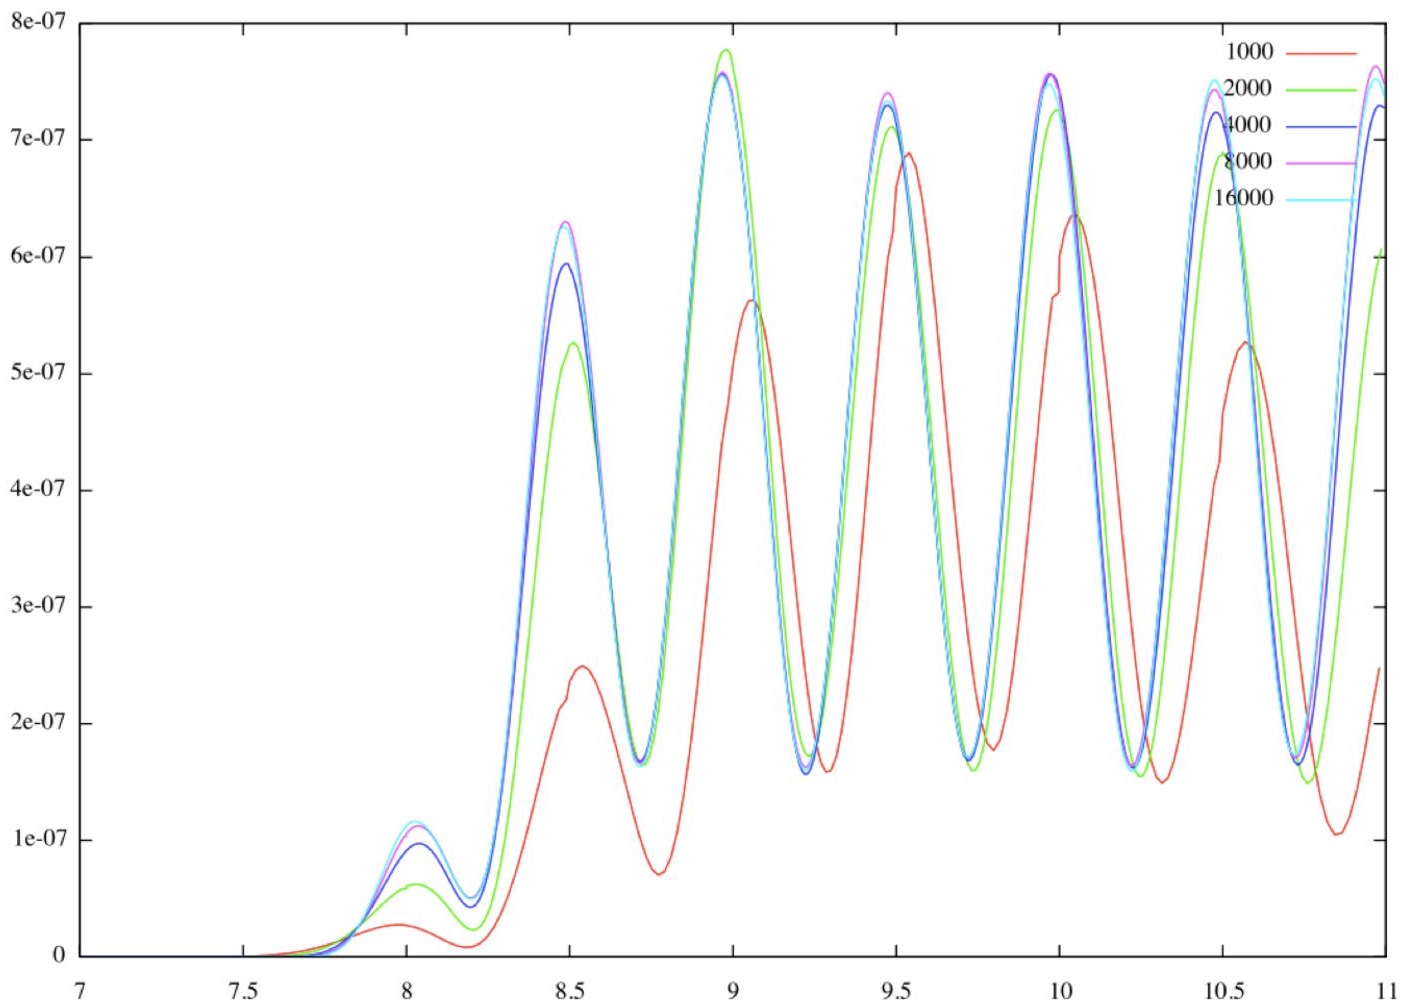 Graph depicts the noise propagation in a box: mesh convergence of the spatial integral k(t) as a function of time.